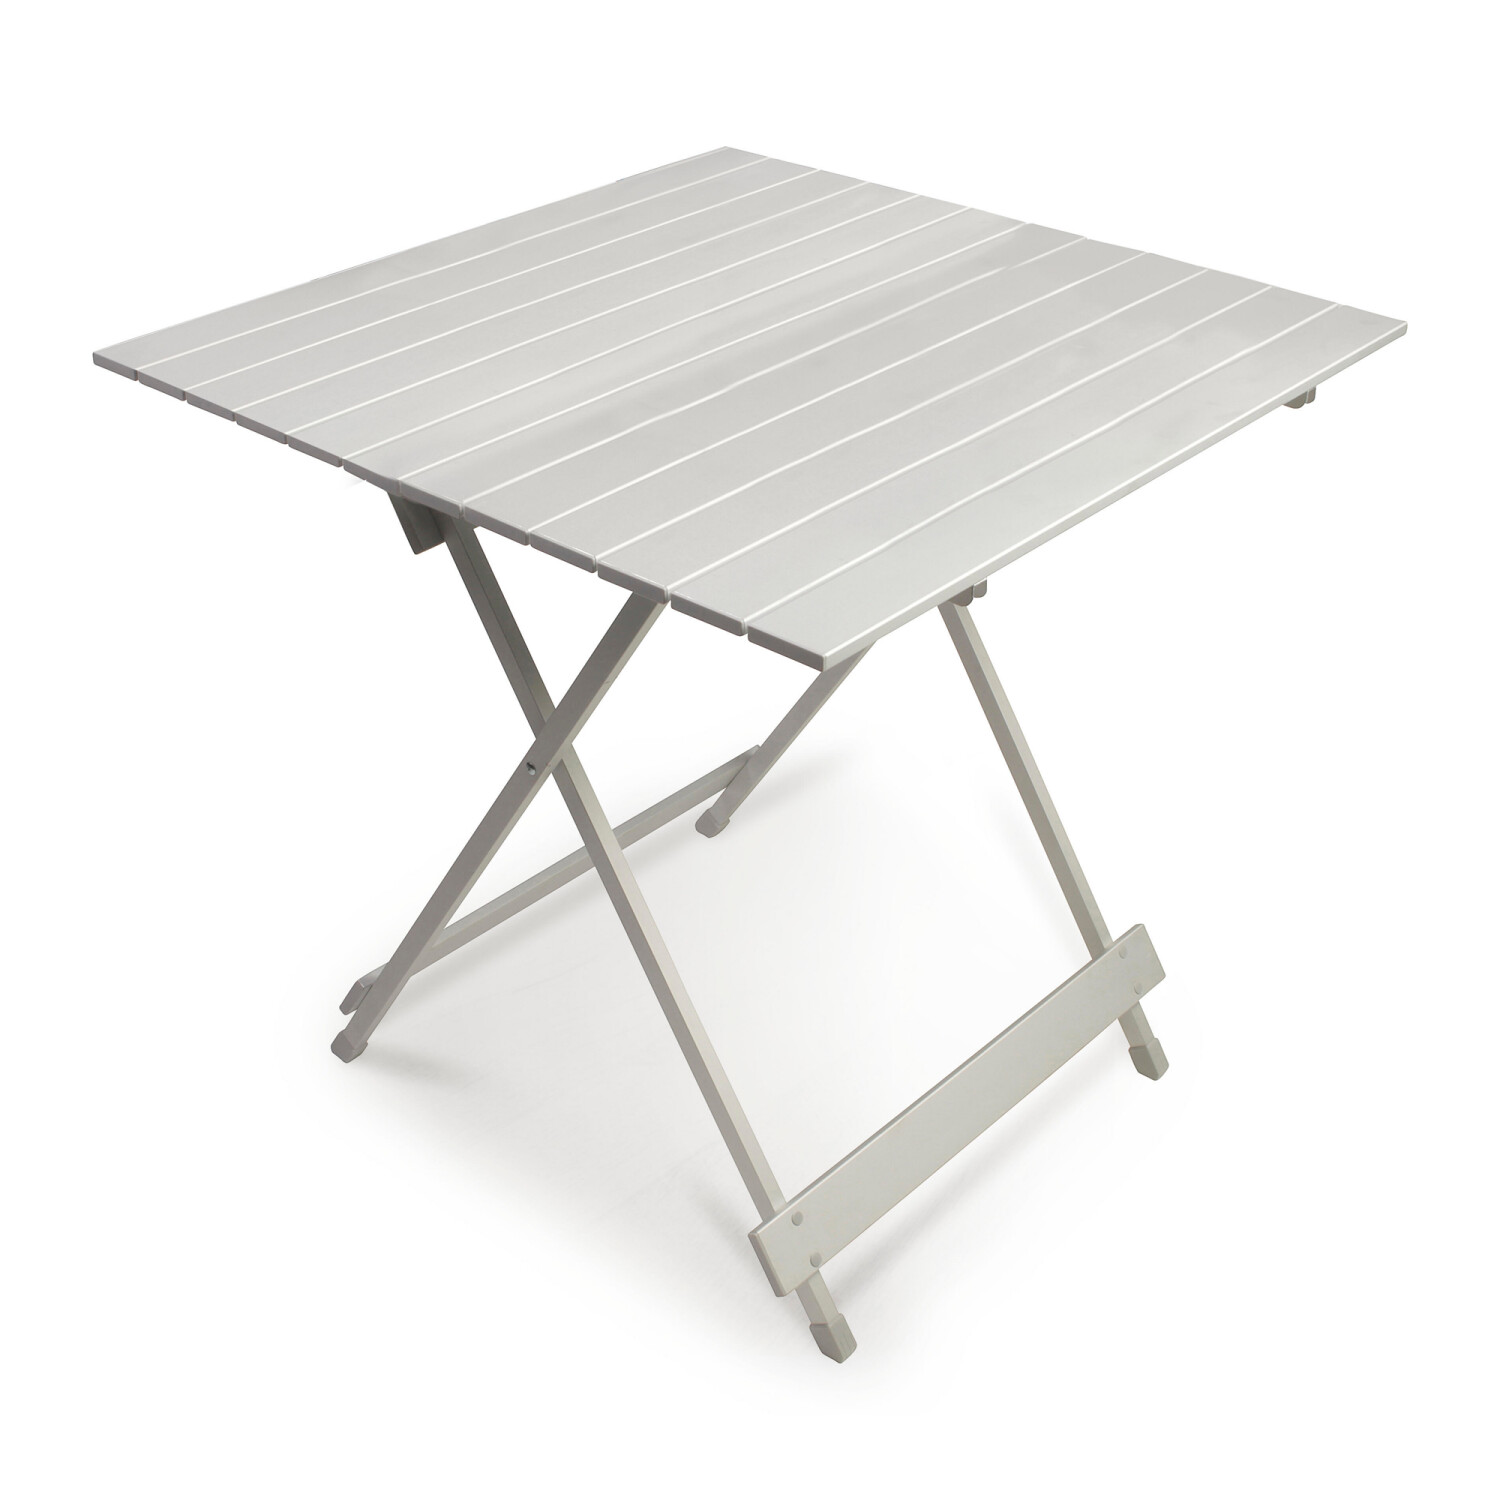 Photos - Outdoor Furniture Kampa Dometic Outdoor Dometic Leaf Medium camping table 70x70x69cm grey 